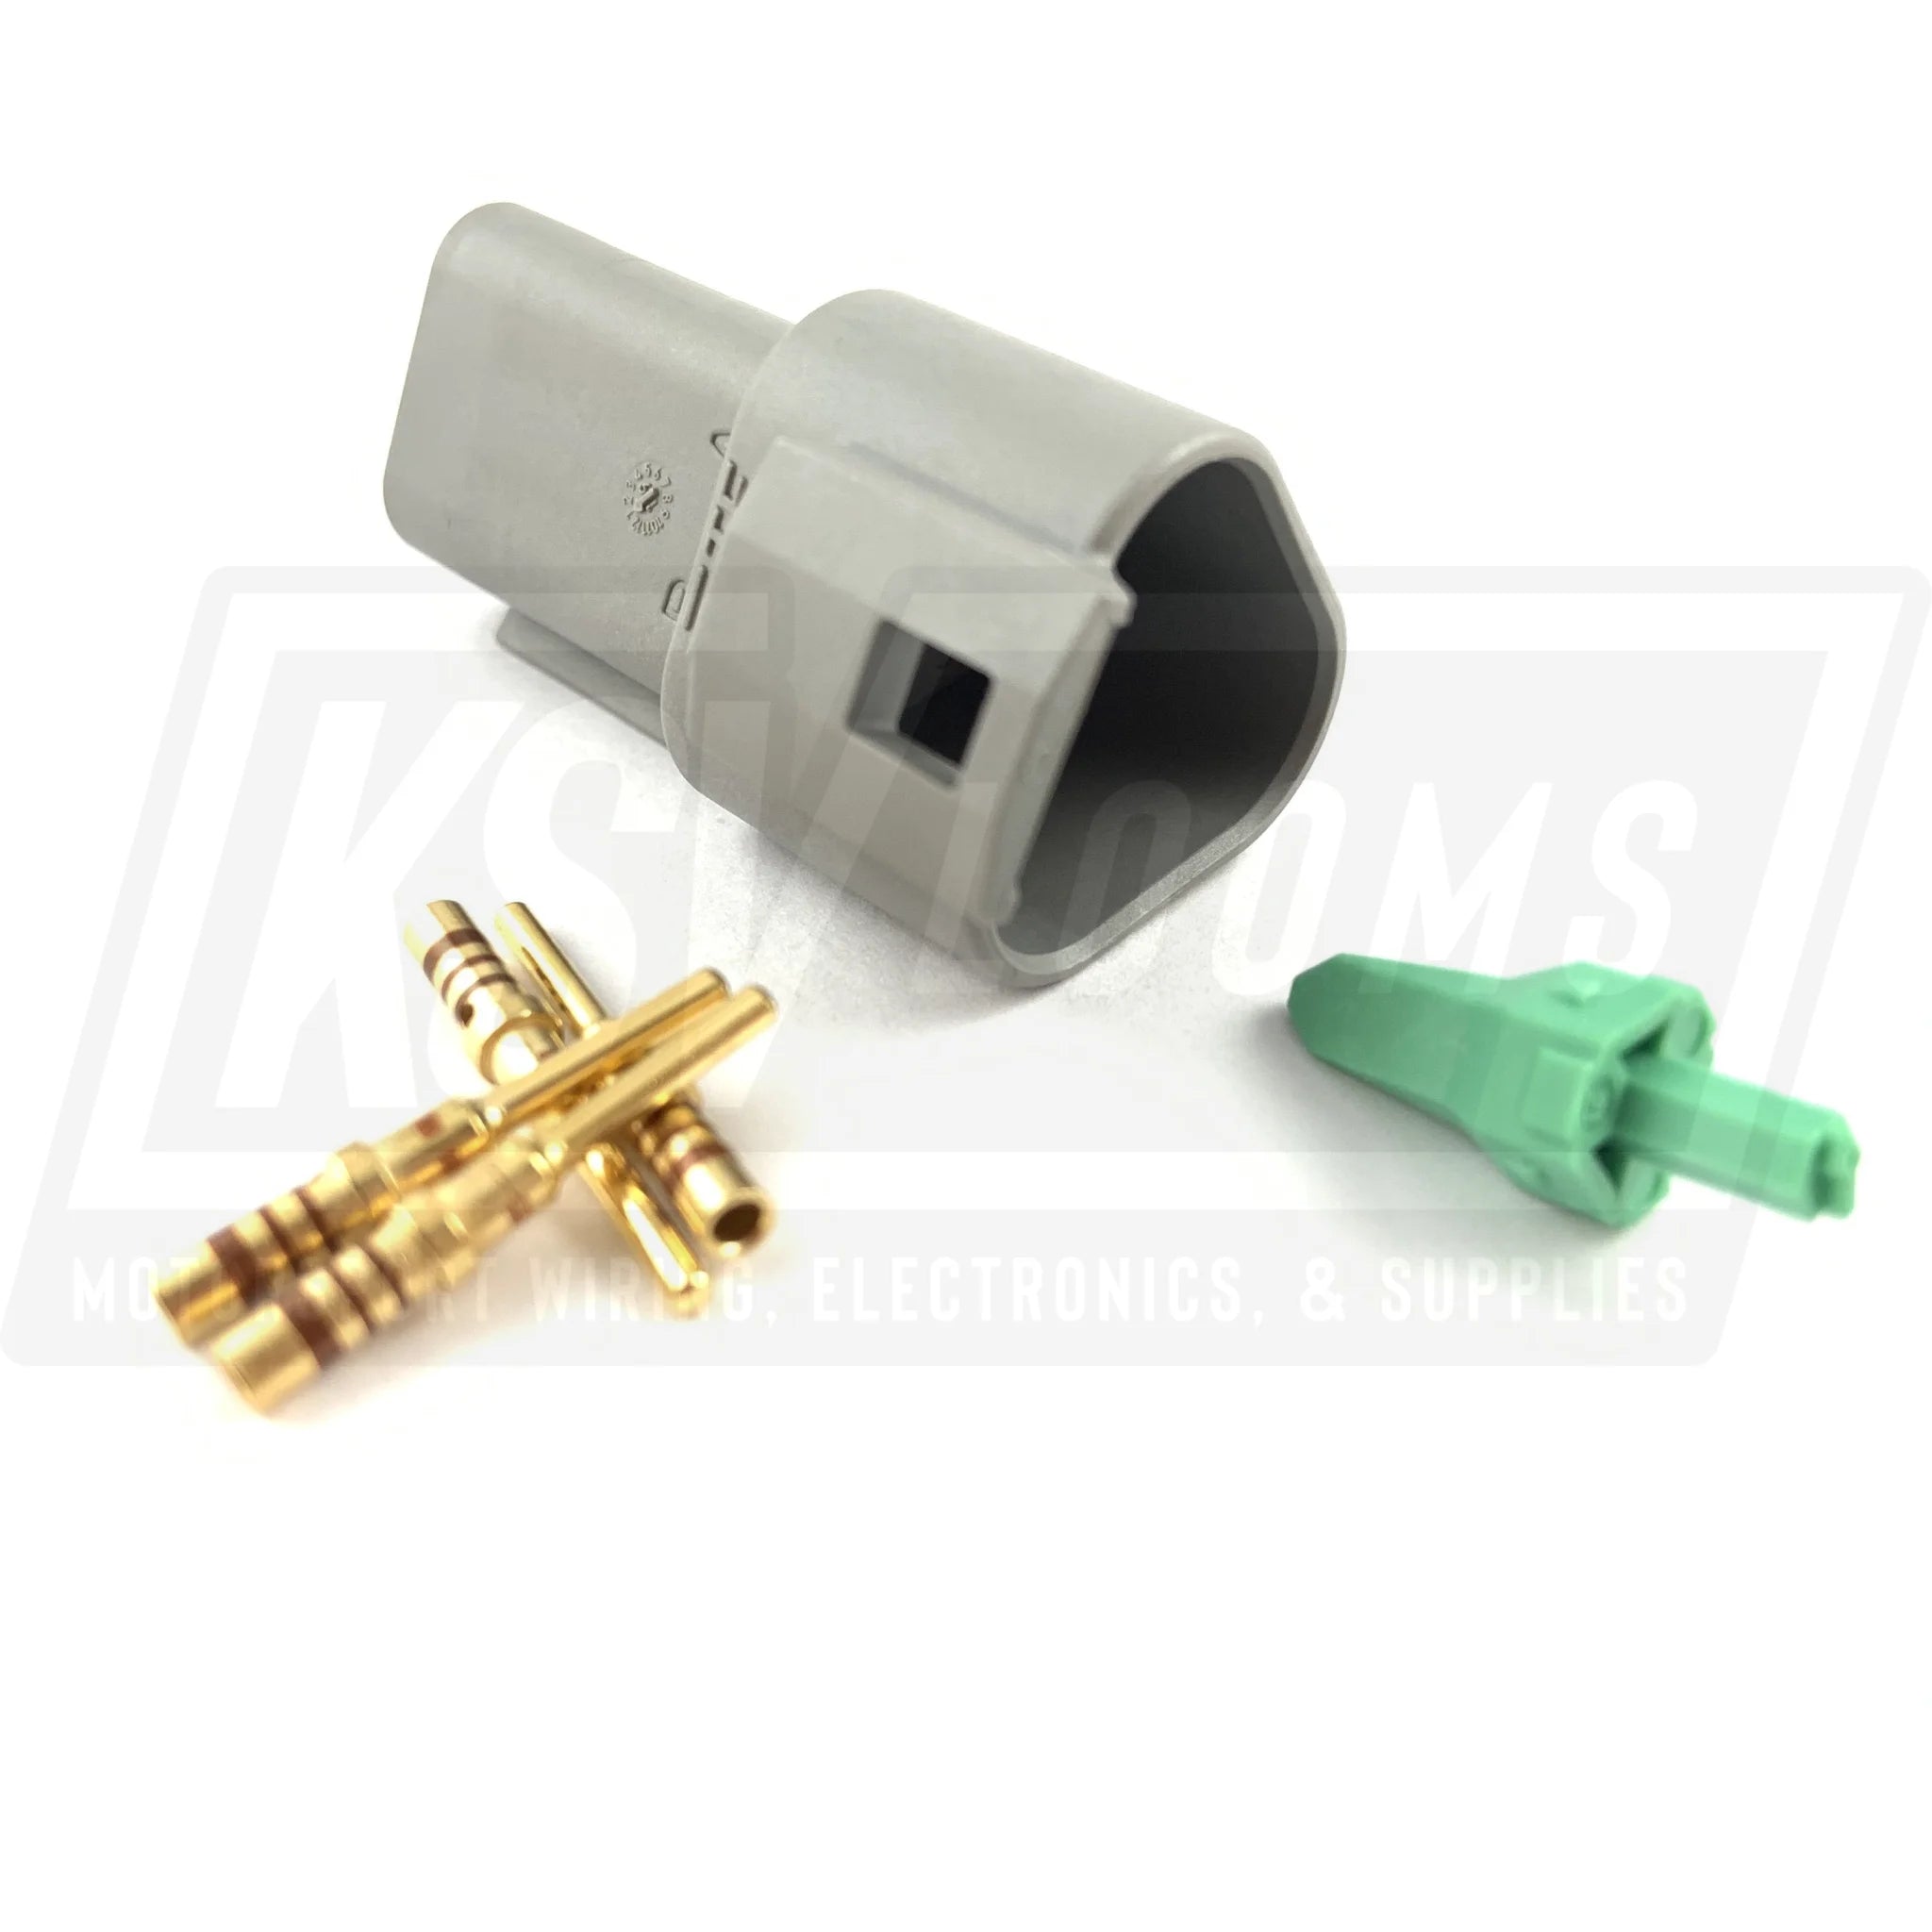 Deutsch Dt 3-Way Pin Receptacle Connector Kit (20-16 Awg Gold Contacts)